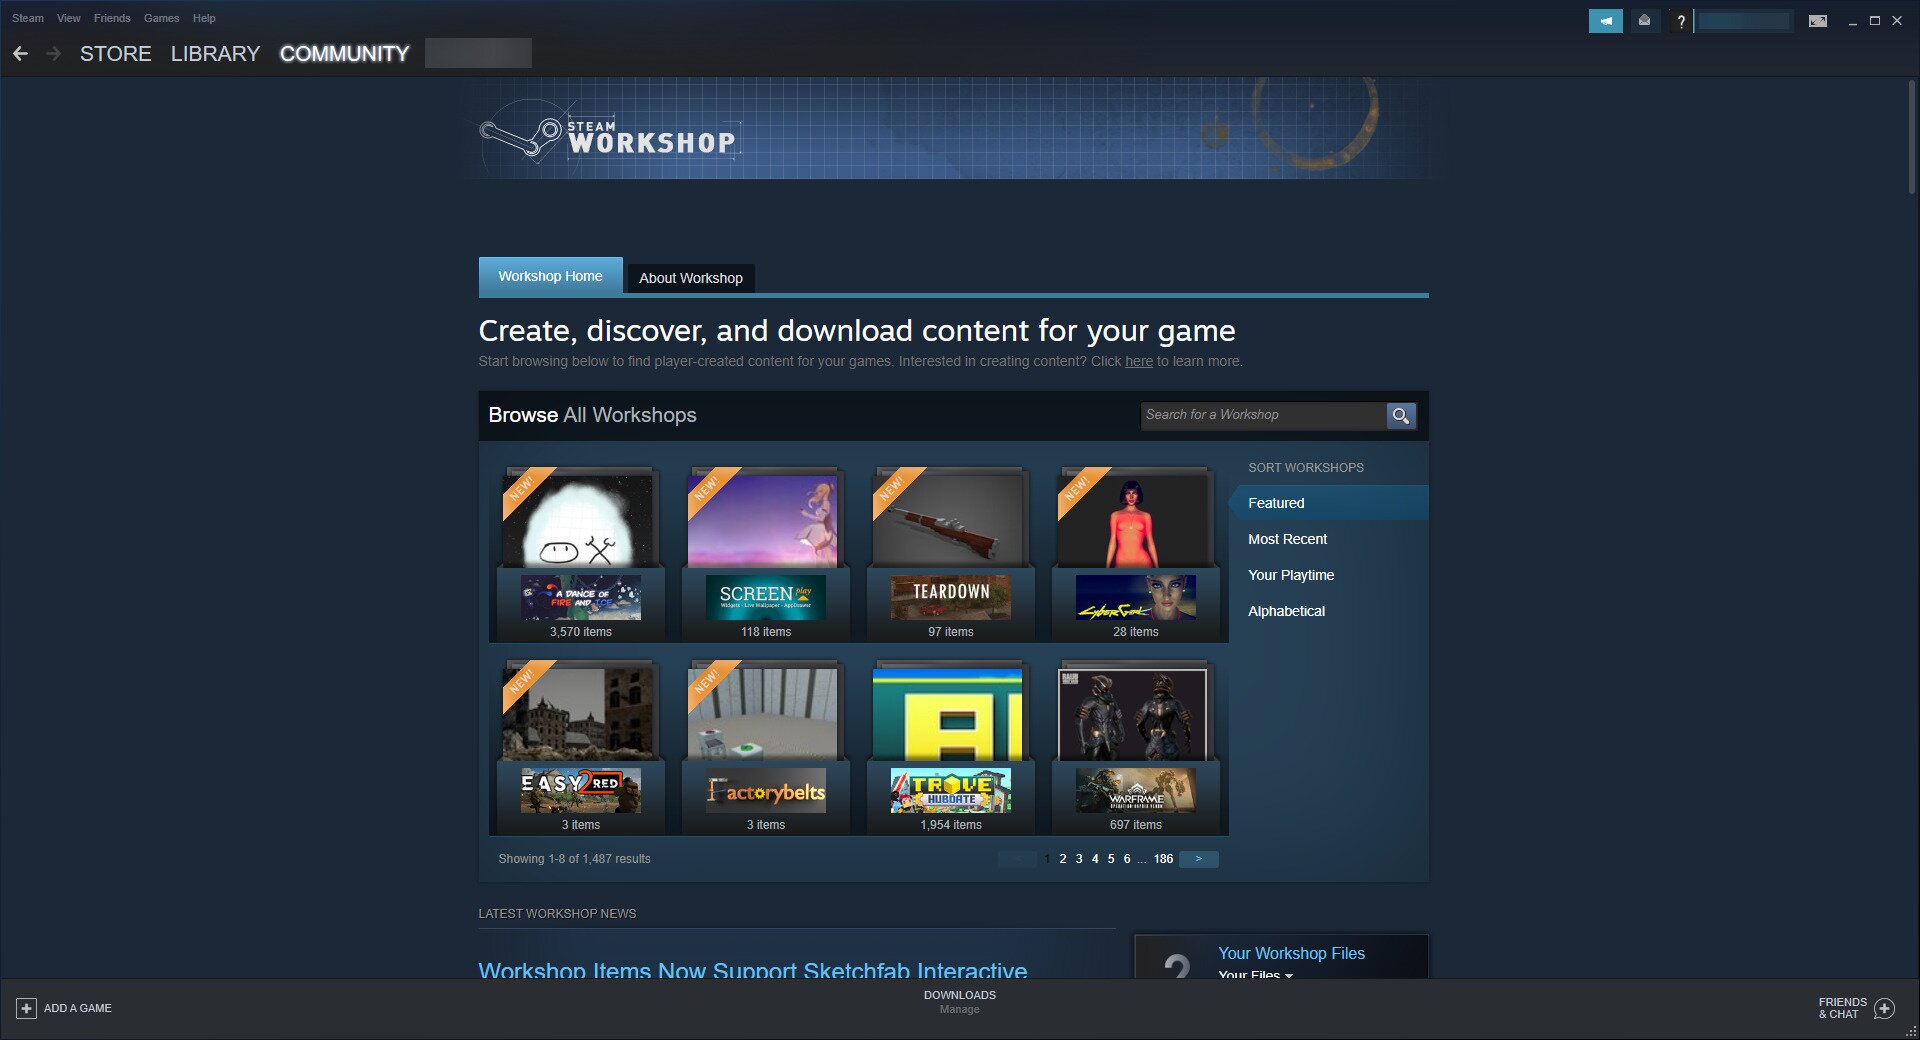 How to View Workshop & Game Subscriptions in Steam - TechSwift